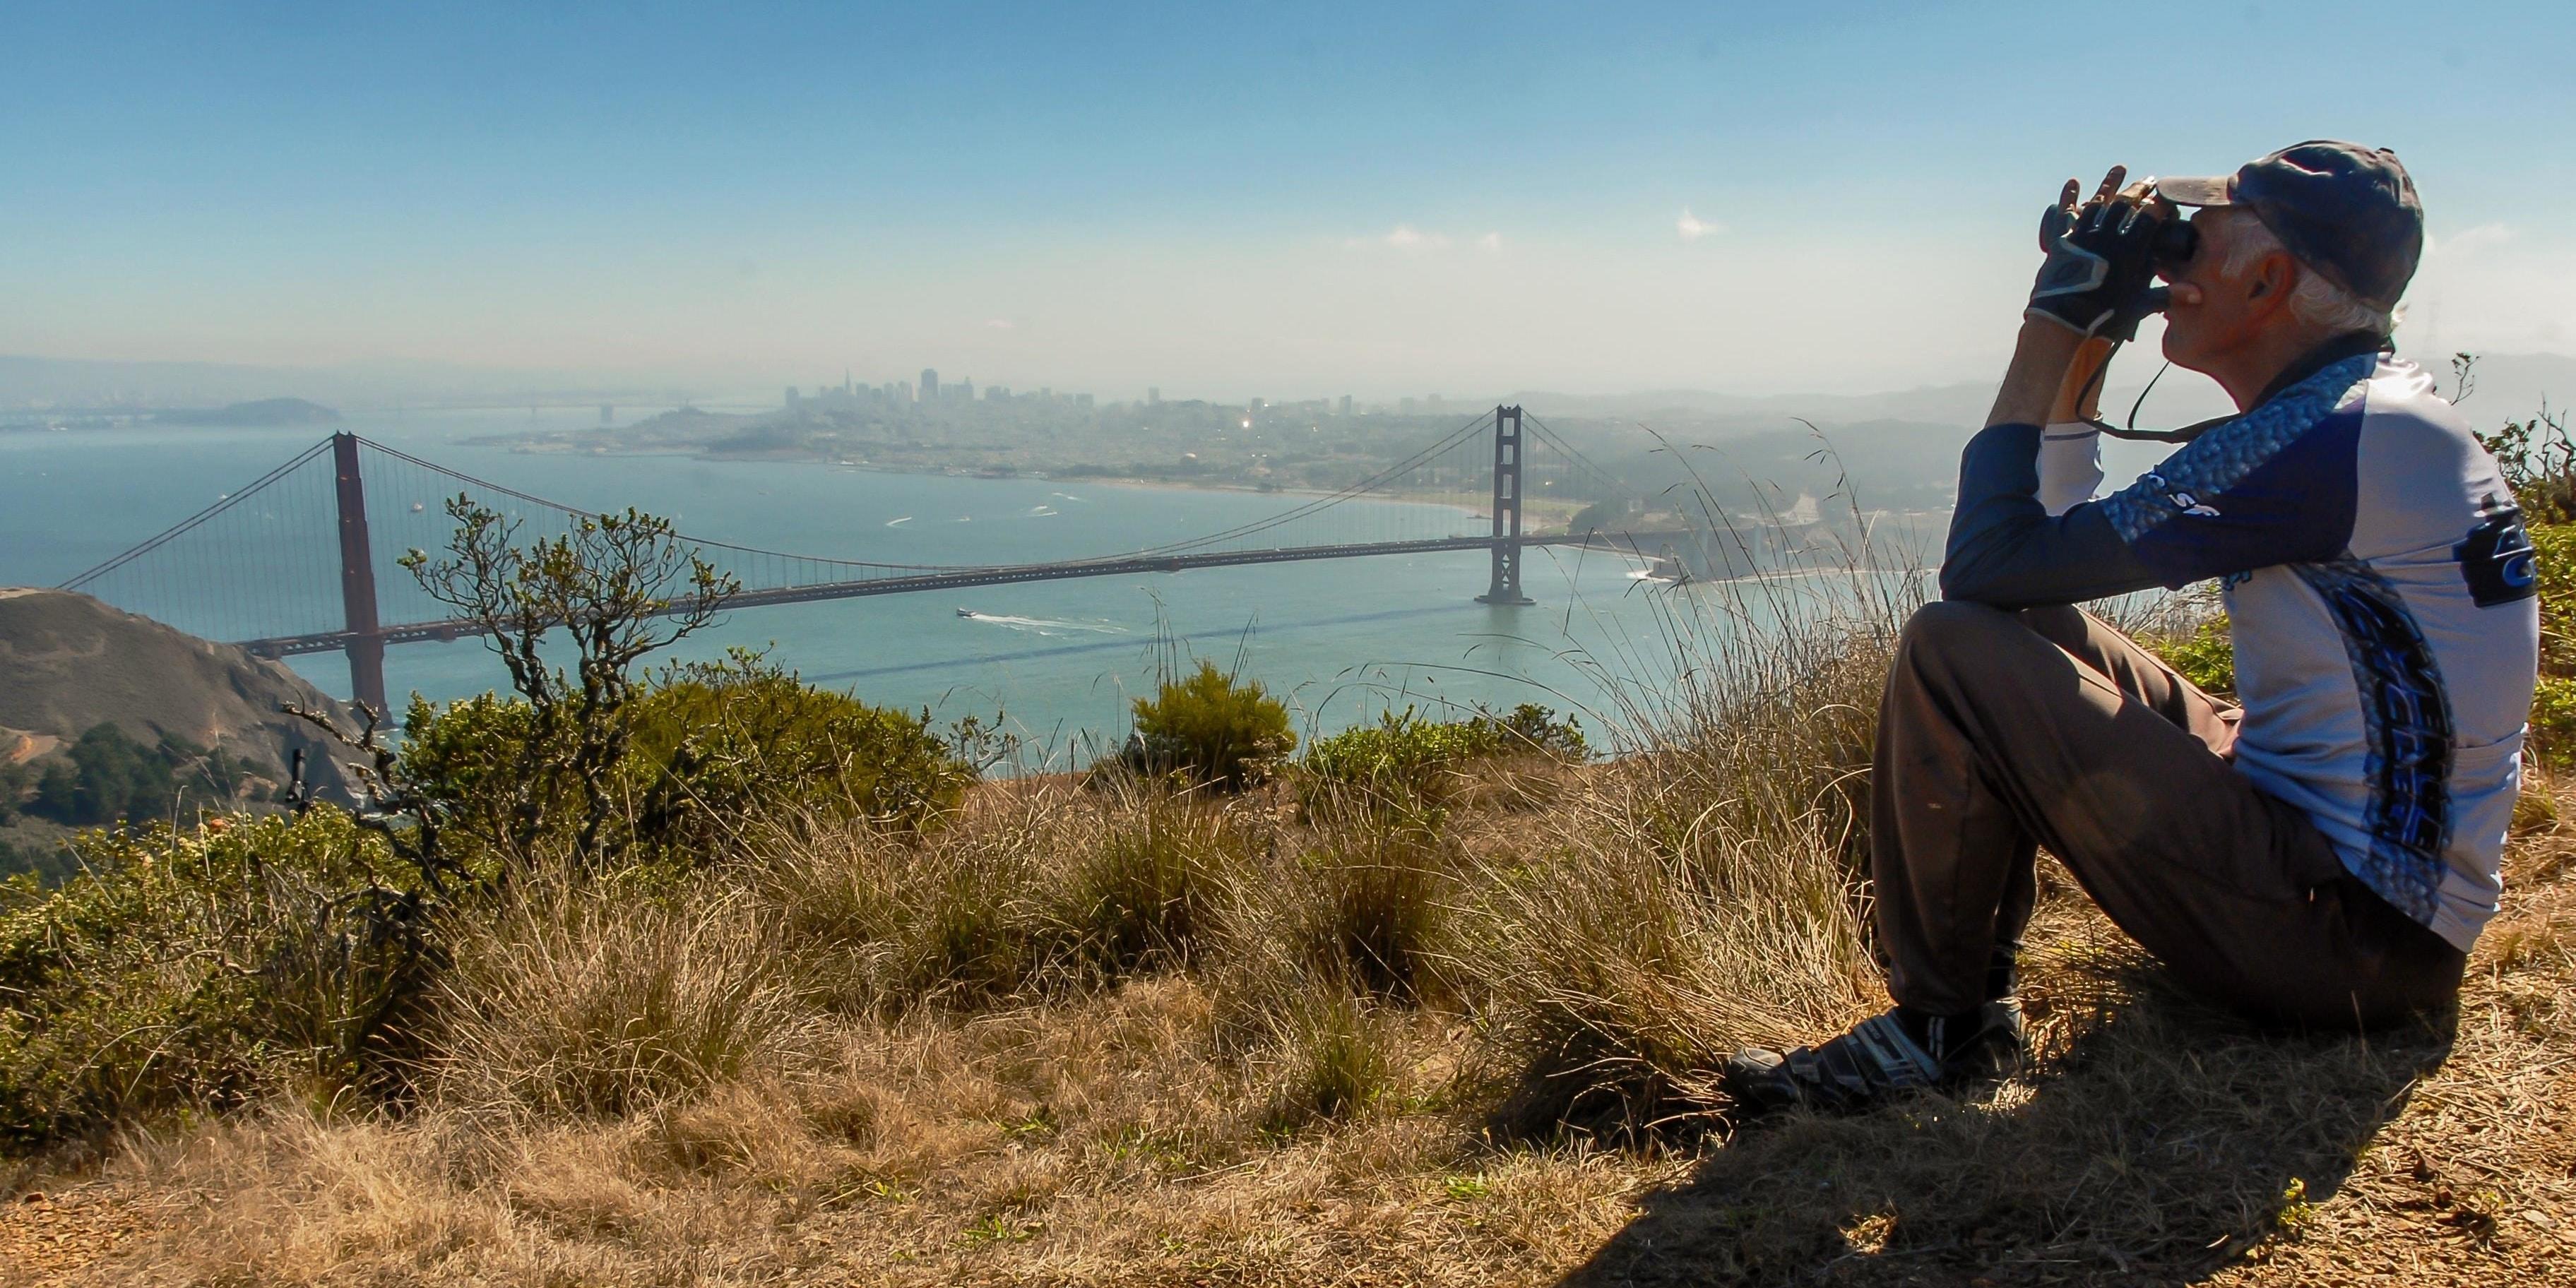 Spectacular views of Golden Gate from the Marin Headlands